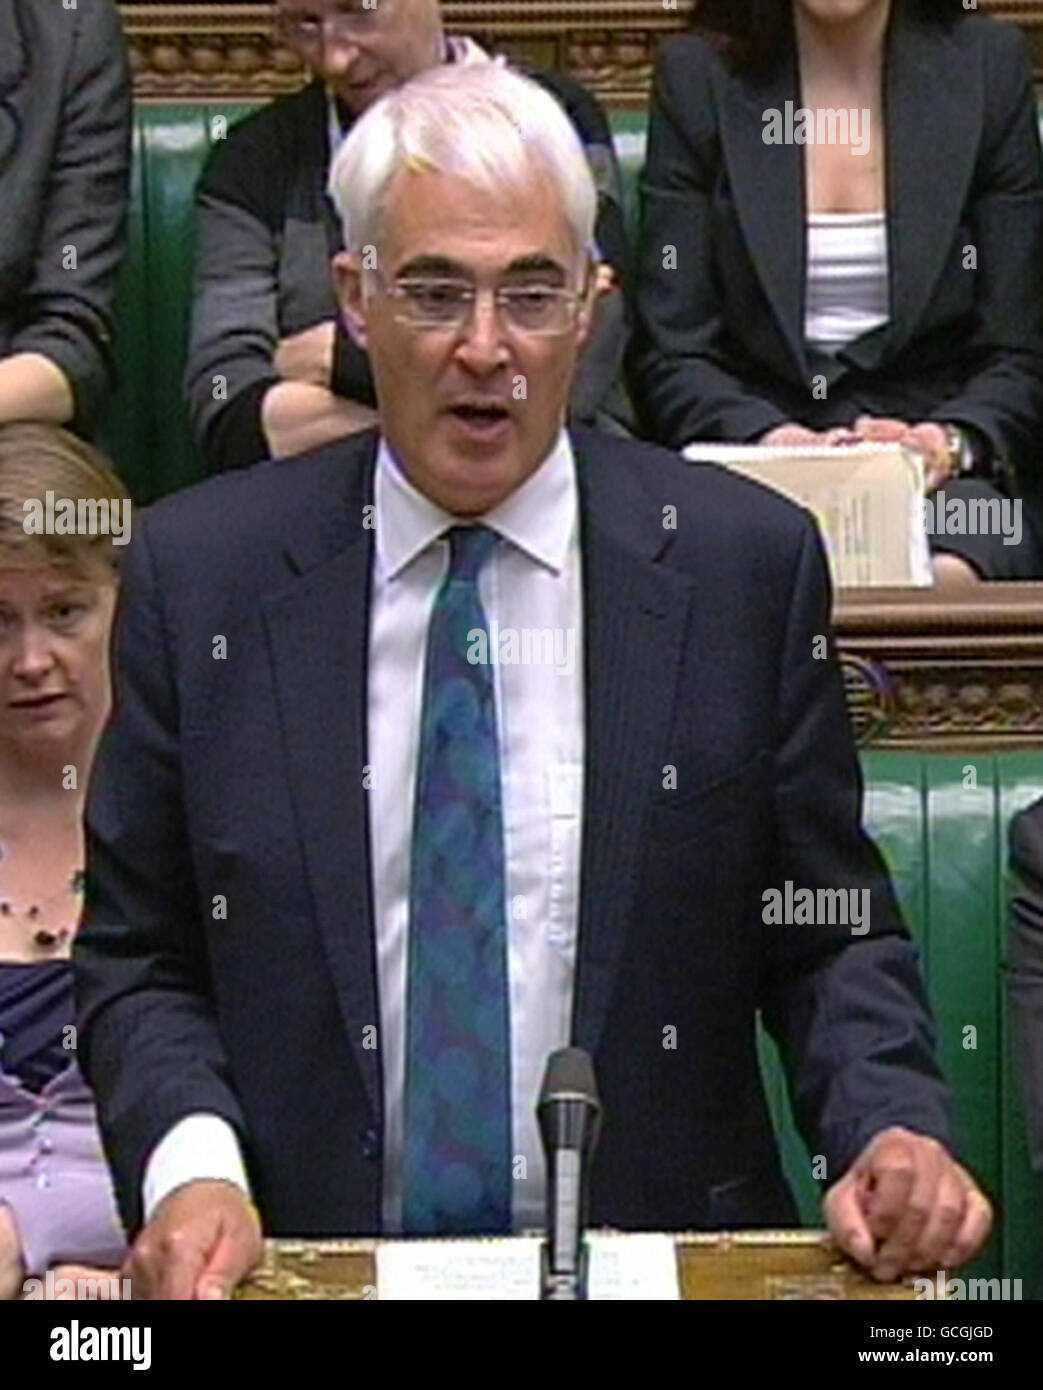 Shadow Chancellor Alistair Darling asks a question about the Government's spending cuts in the House of Commons, central London. Stock Photo